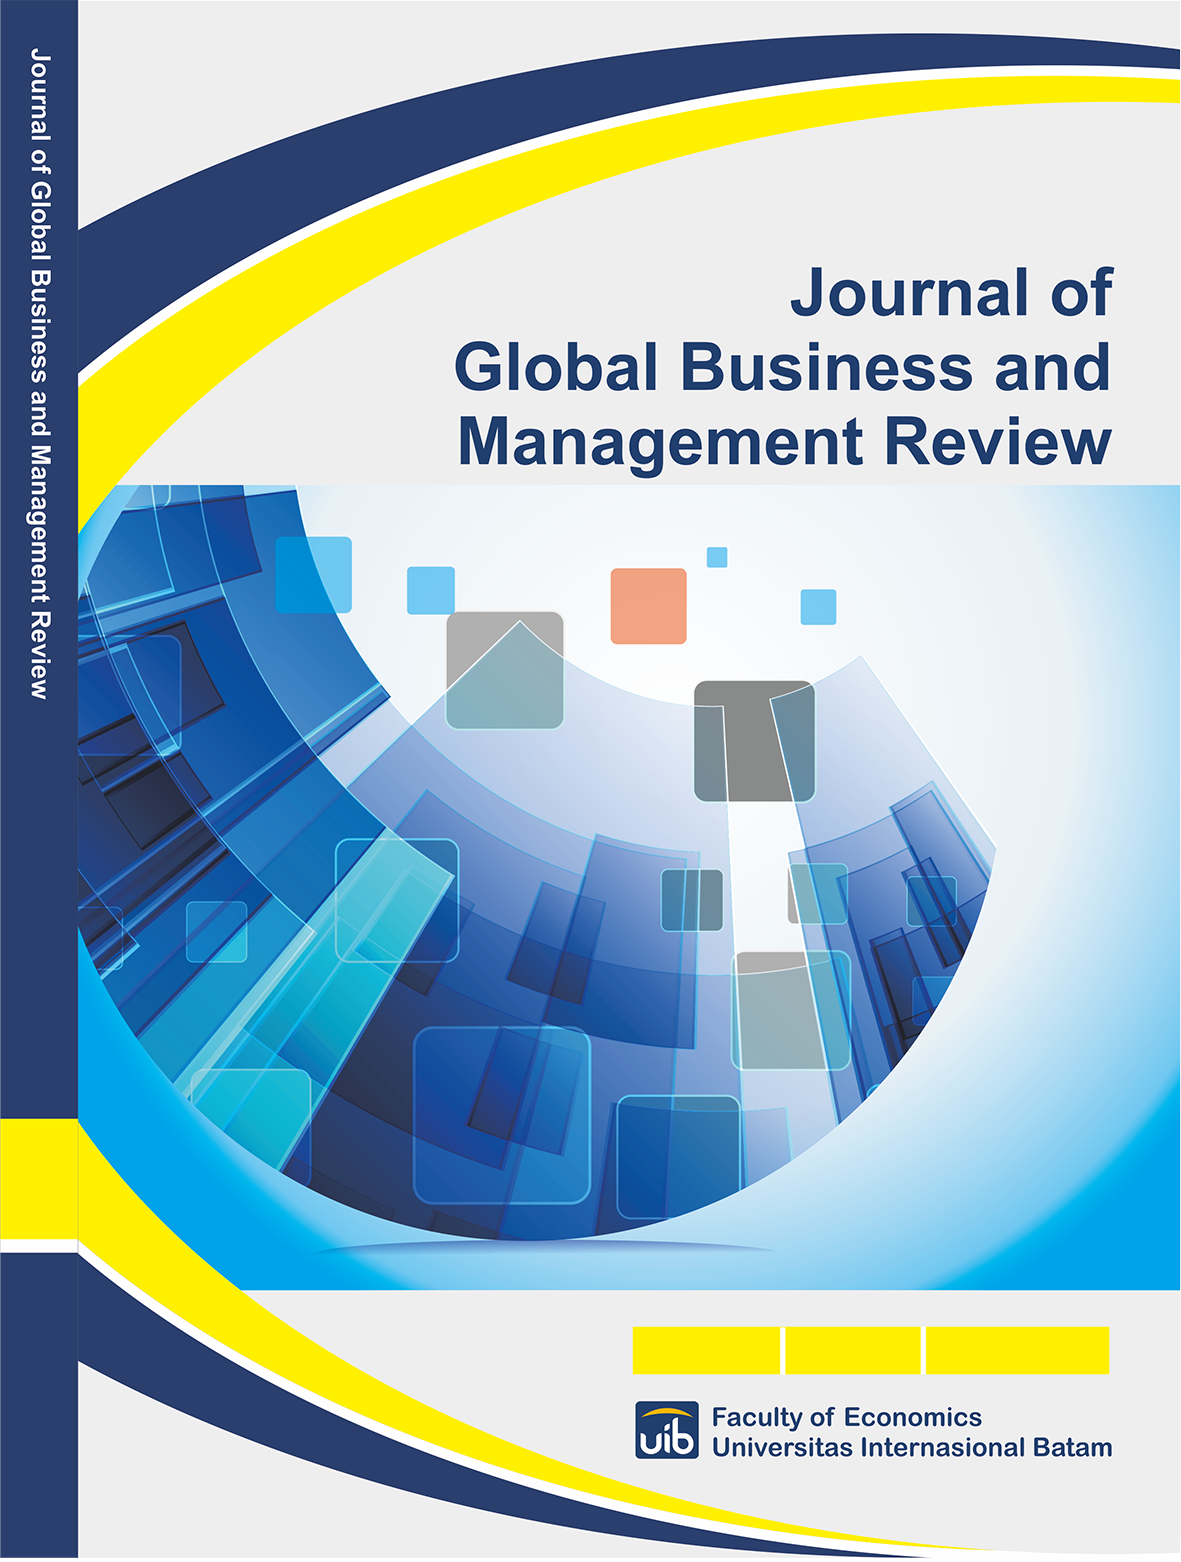 					View Vol. 2 No. 2 (2020): Journal of Global Business and Management Review
				